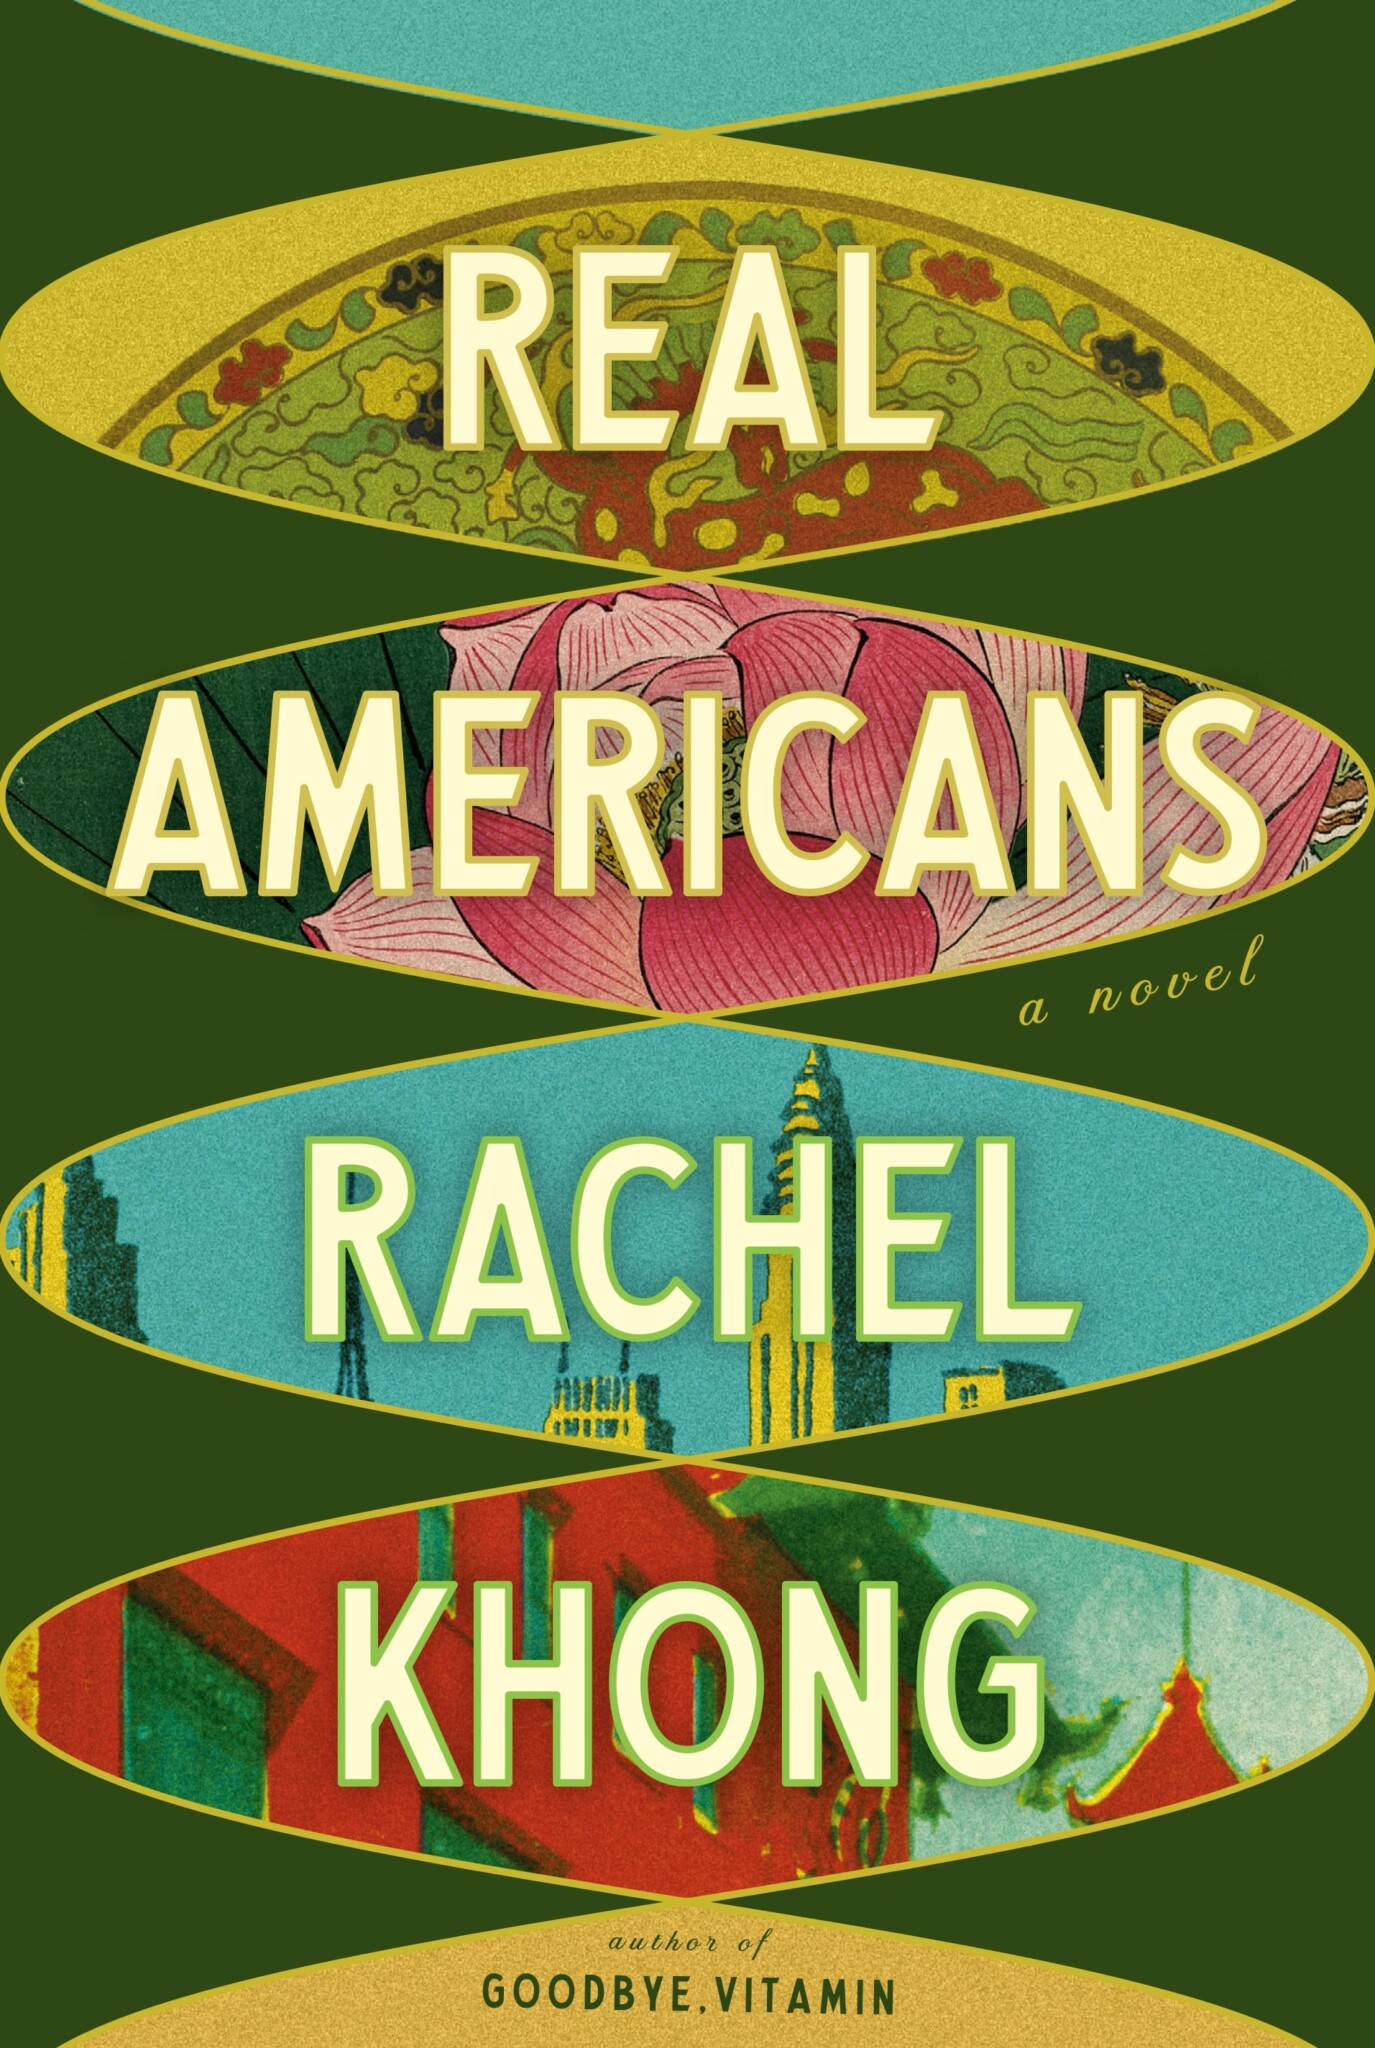 The book cover for "Real Americans" by Rachel Khong.